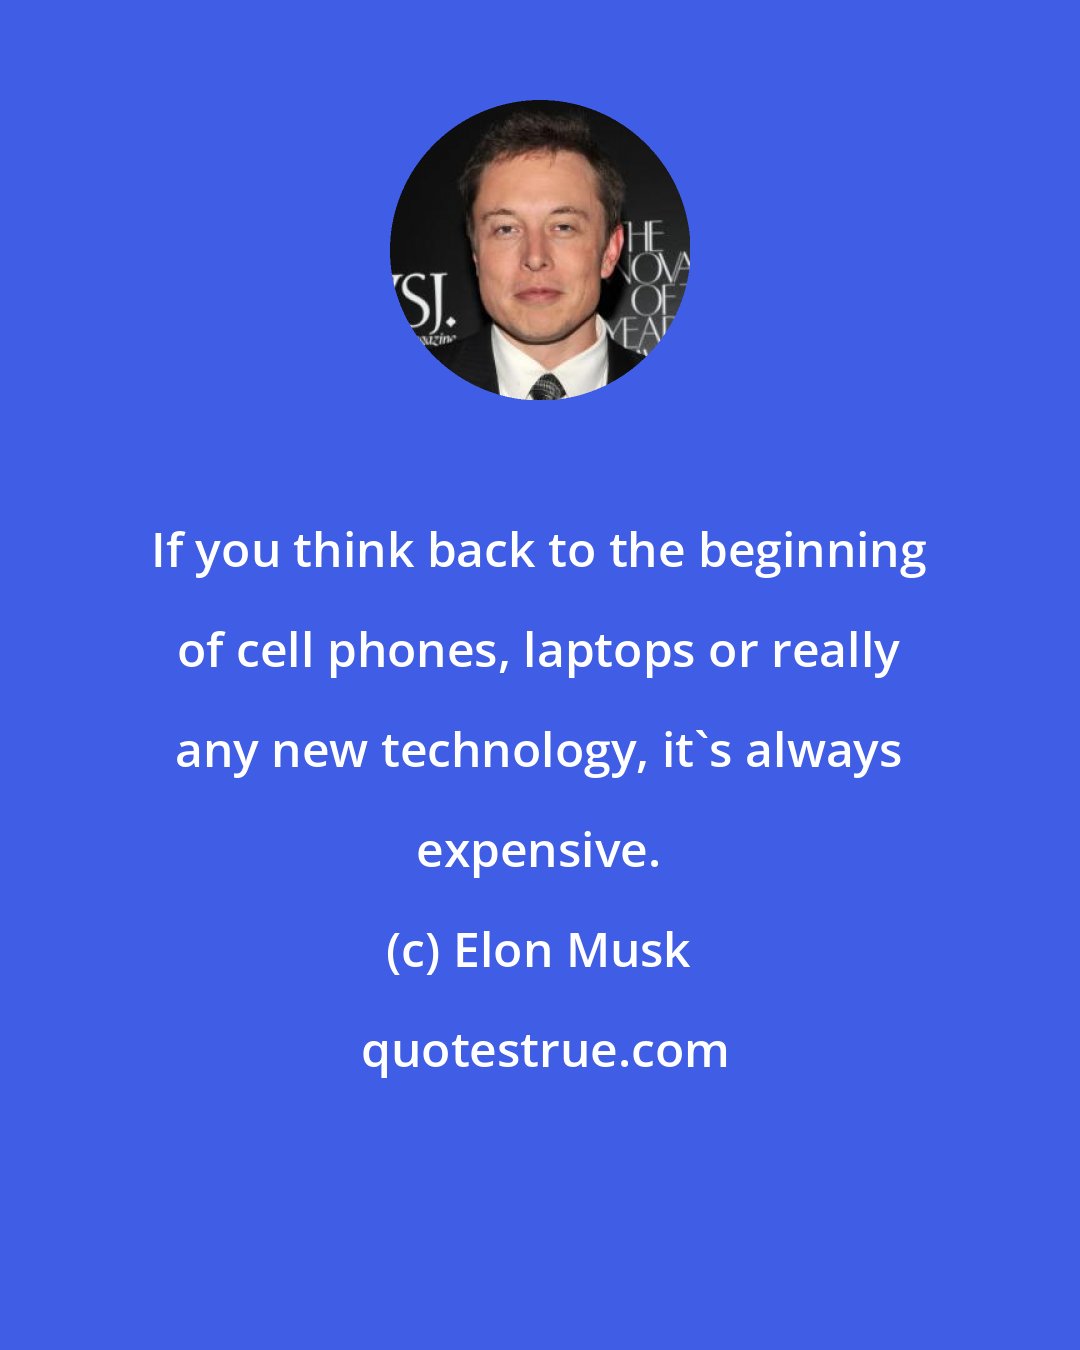 Elon Musk: If you think back to the beginning of cell phones, laptops or really any new technology, it's always expensive.